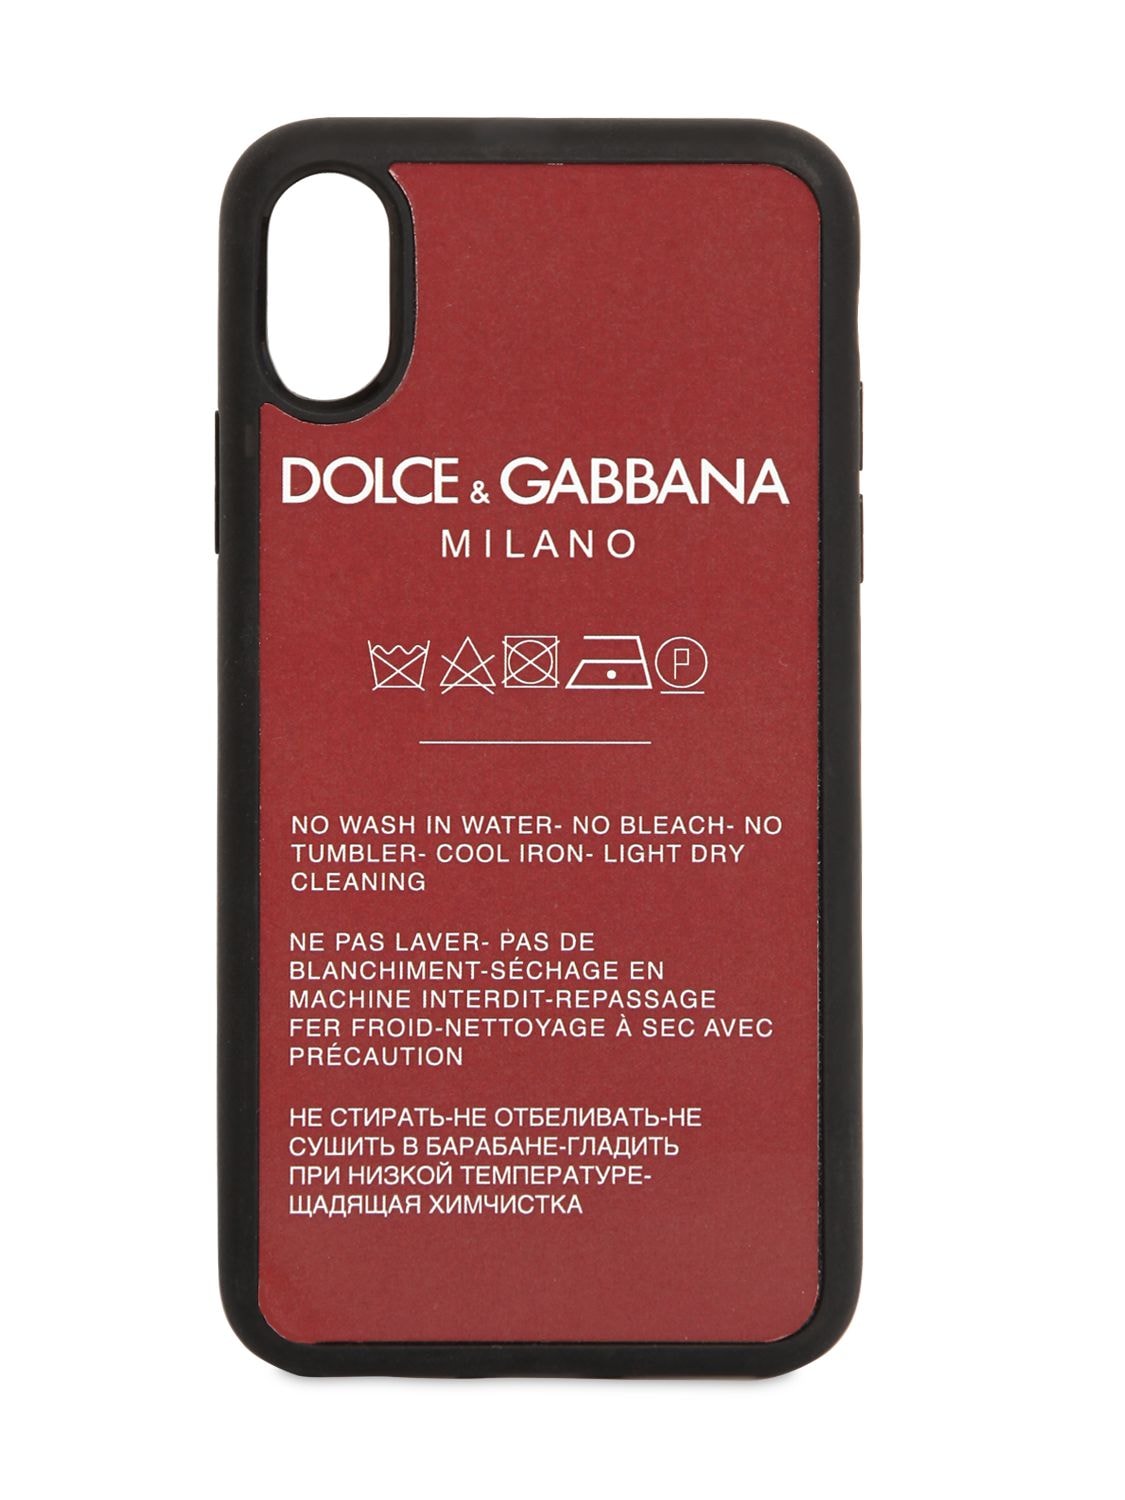 Dolce & Gabbana Laundry Label Print Iphone X Case In Red